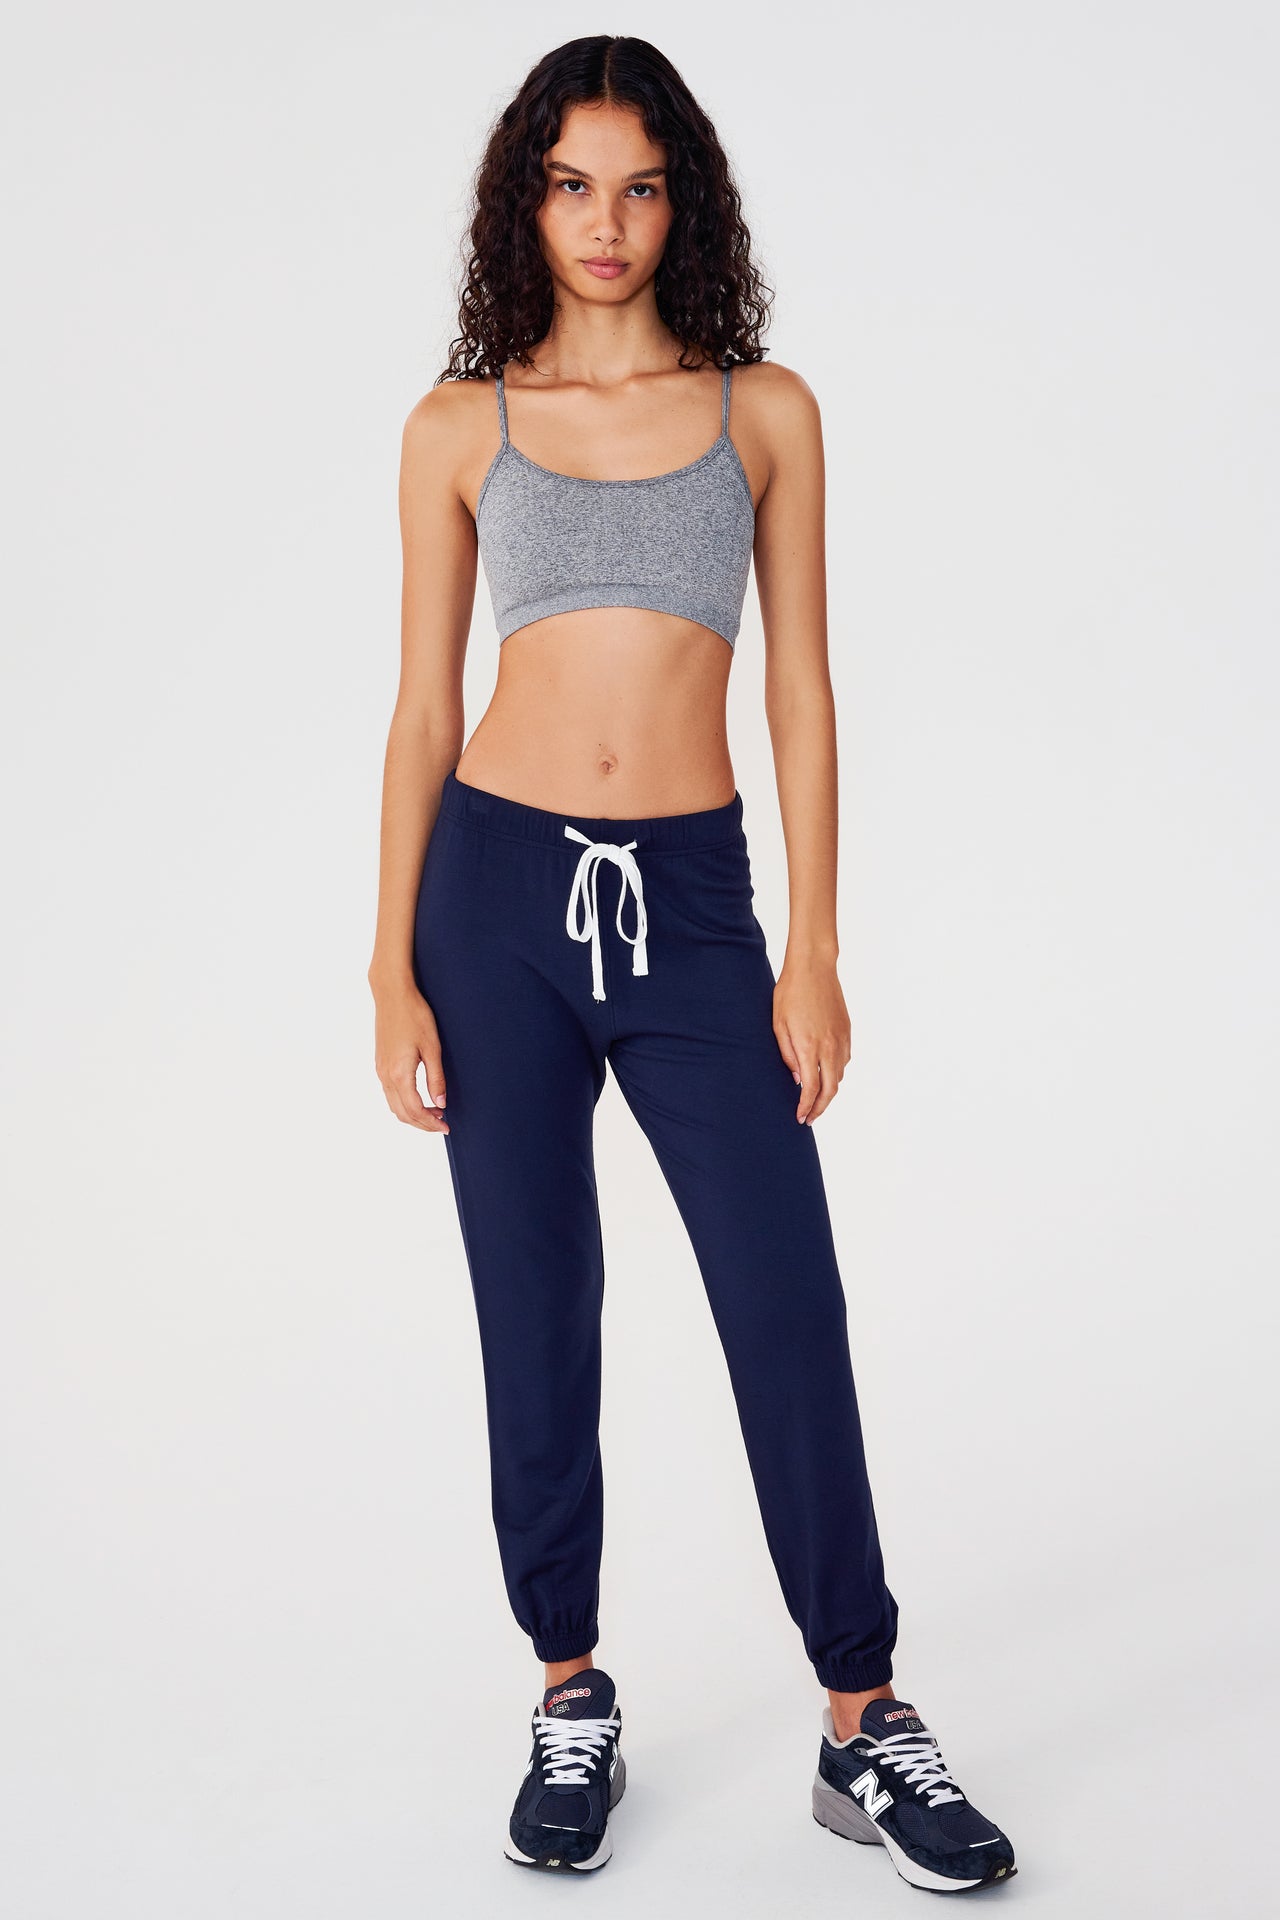 Full front view of woman with dark wavy hair wearing dark blue sweatpant jogger with white drawstring and dark grey bra with spaghetti straps paired with dark blue and white shoes